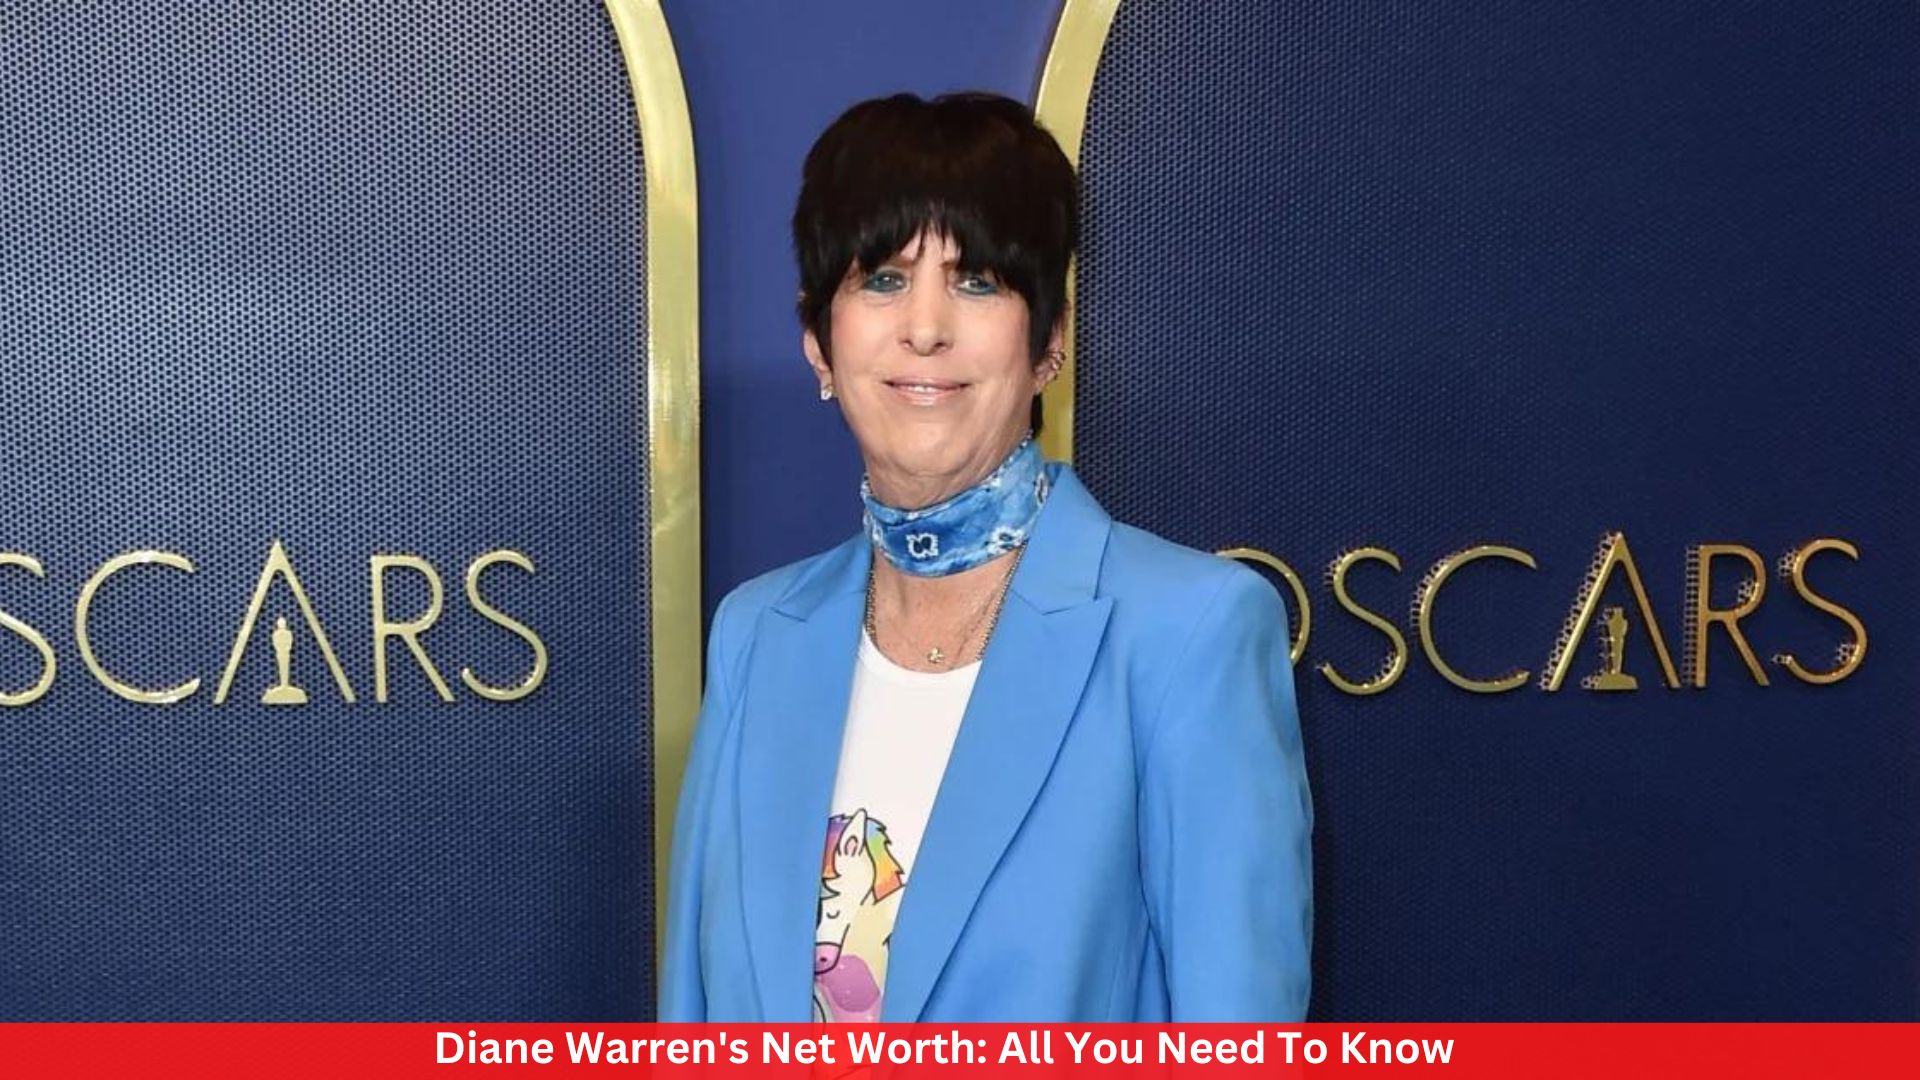 Diane Warren's Net Worth: All You Need To Know